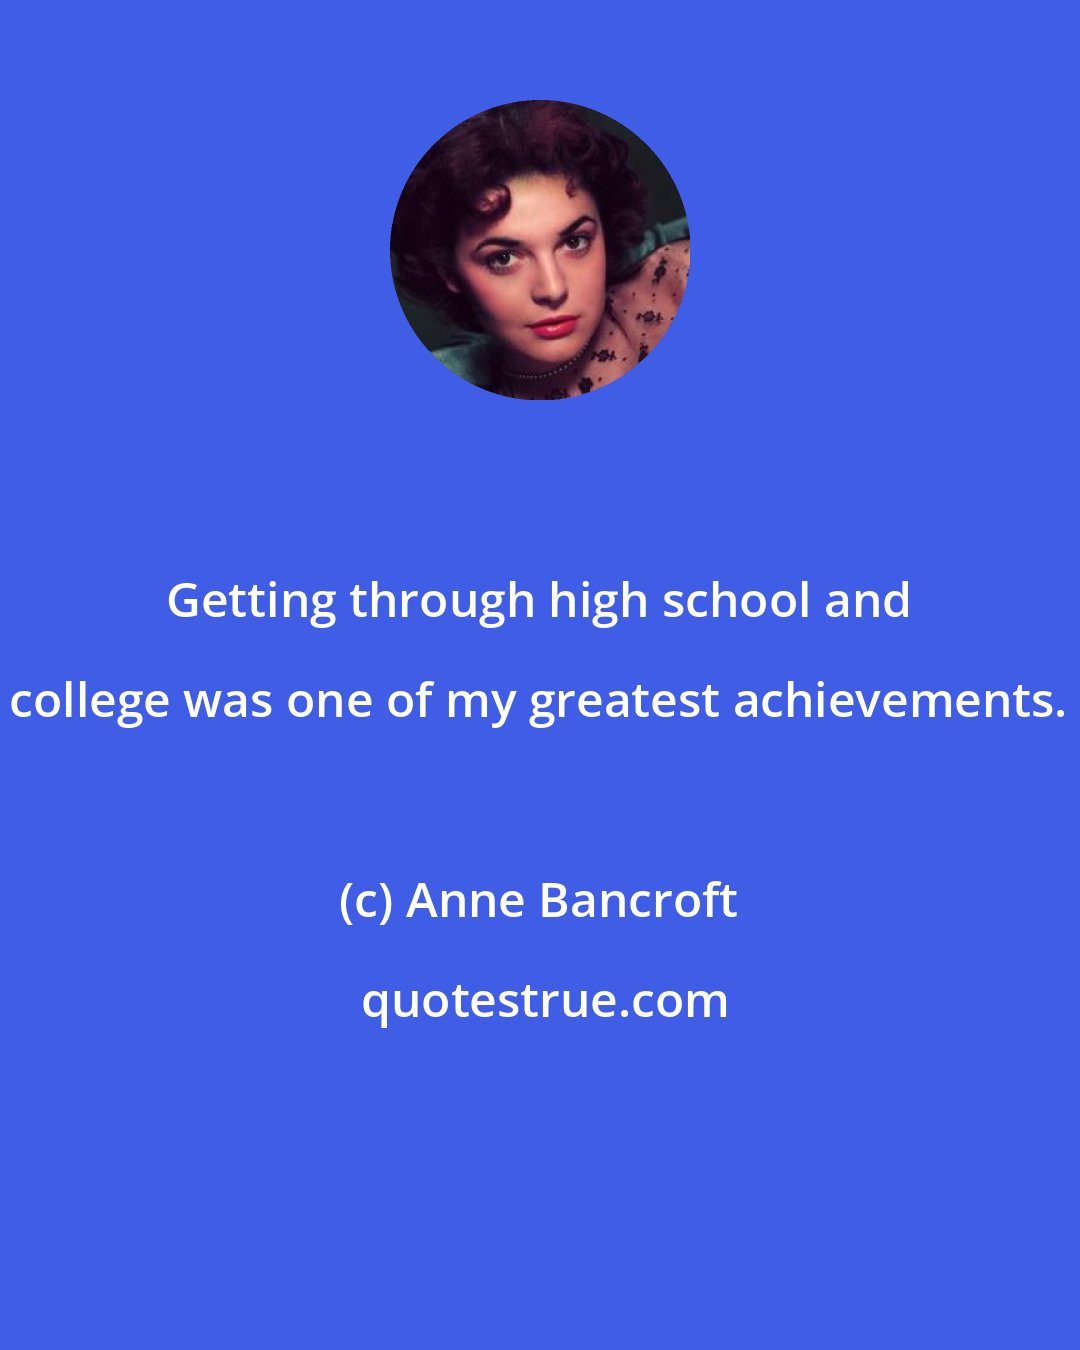 Anne Bancroft: Getting through high school and college was one of my greatest achievements.